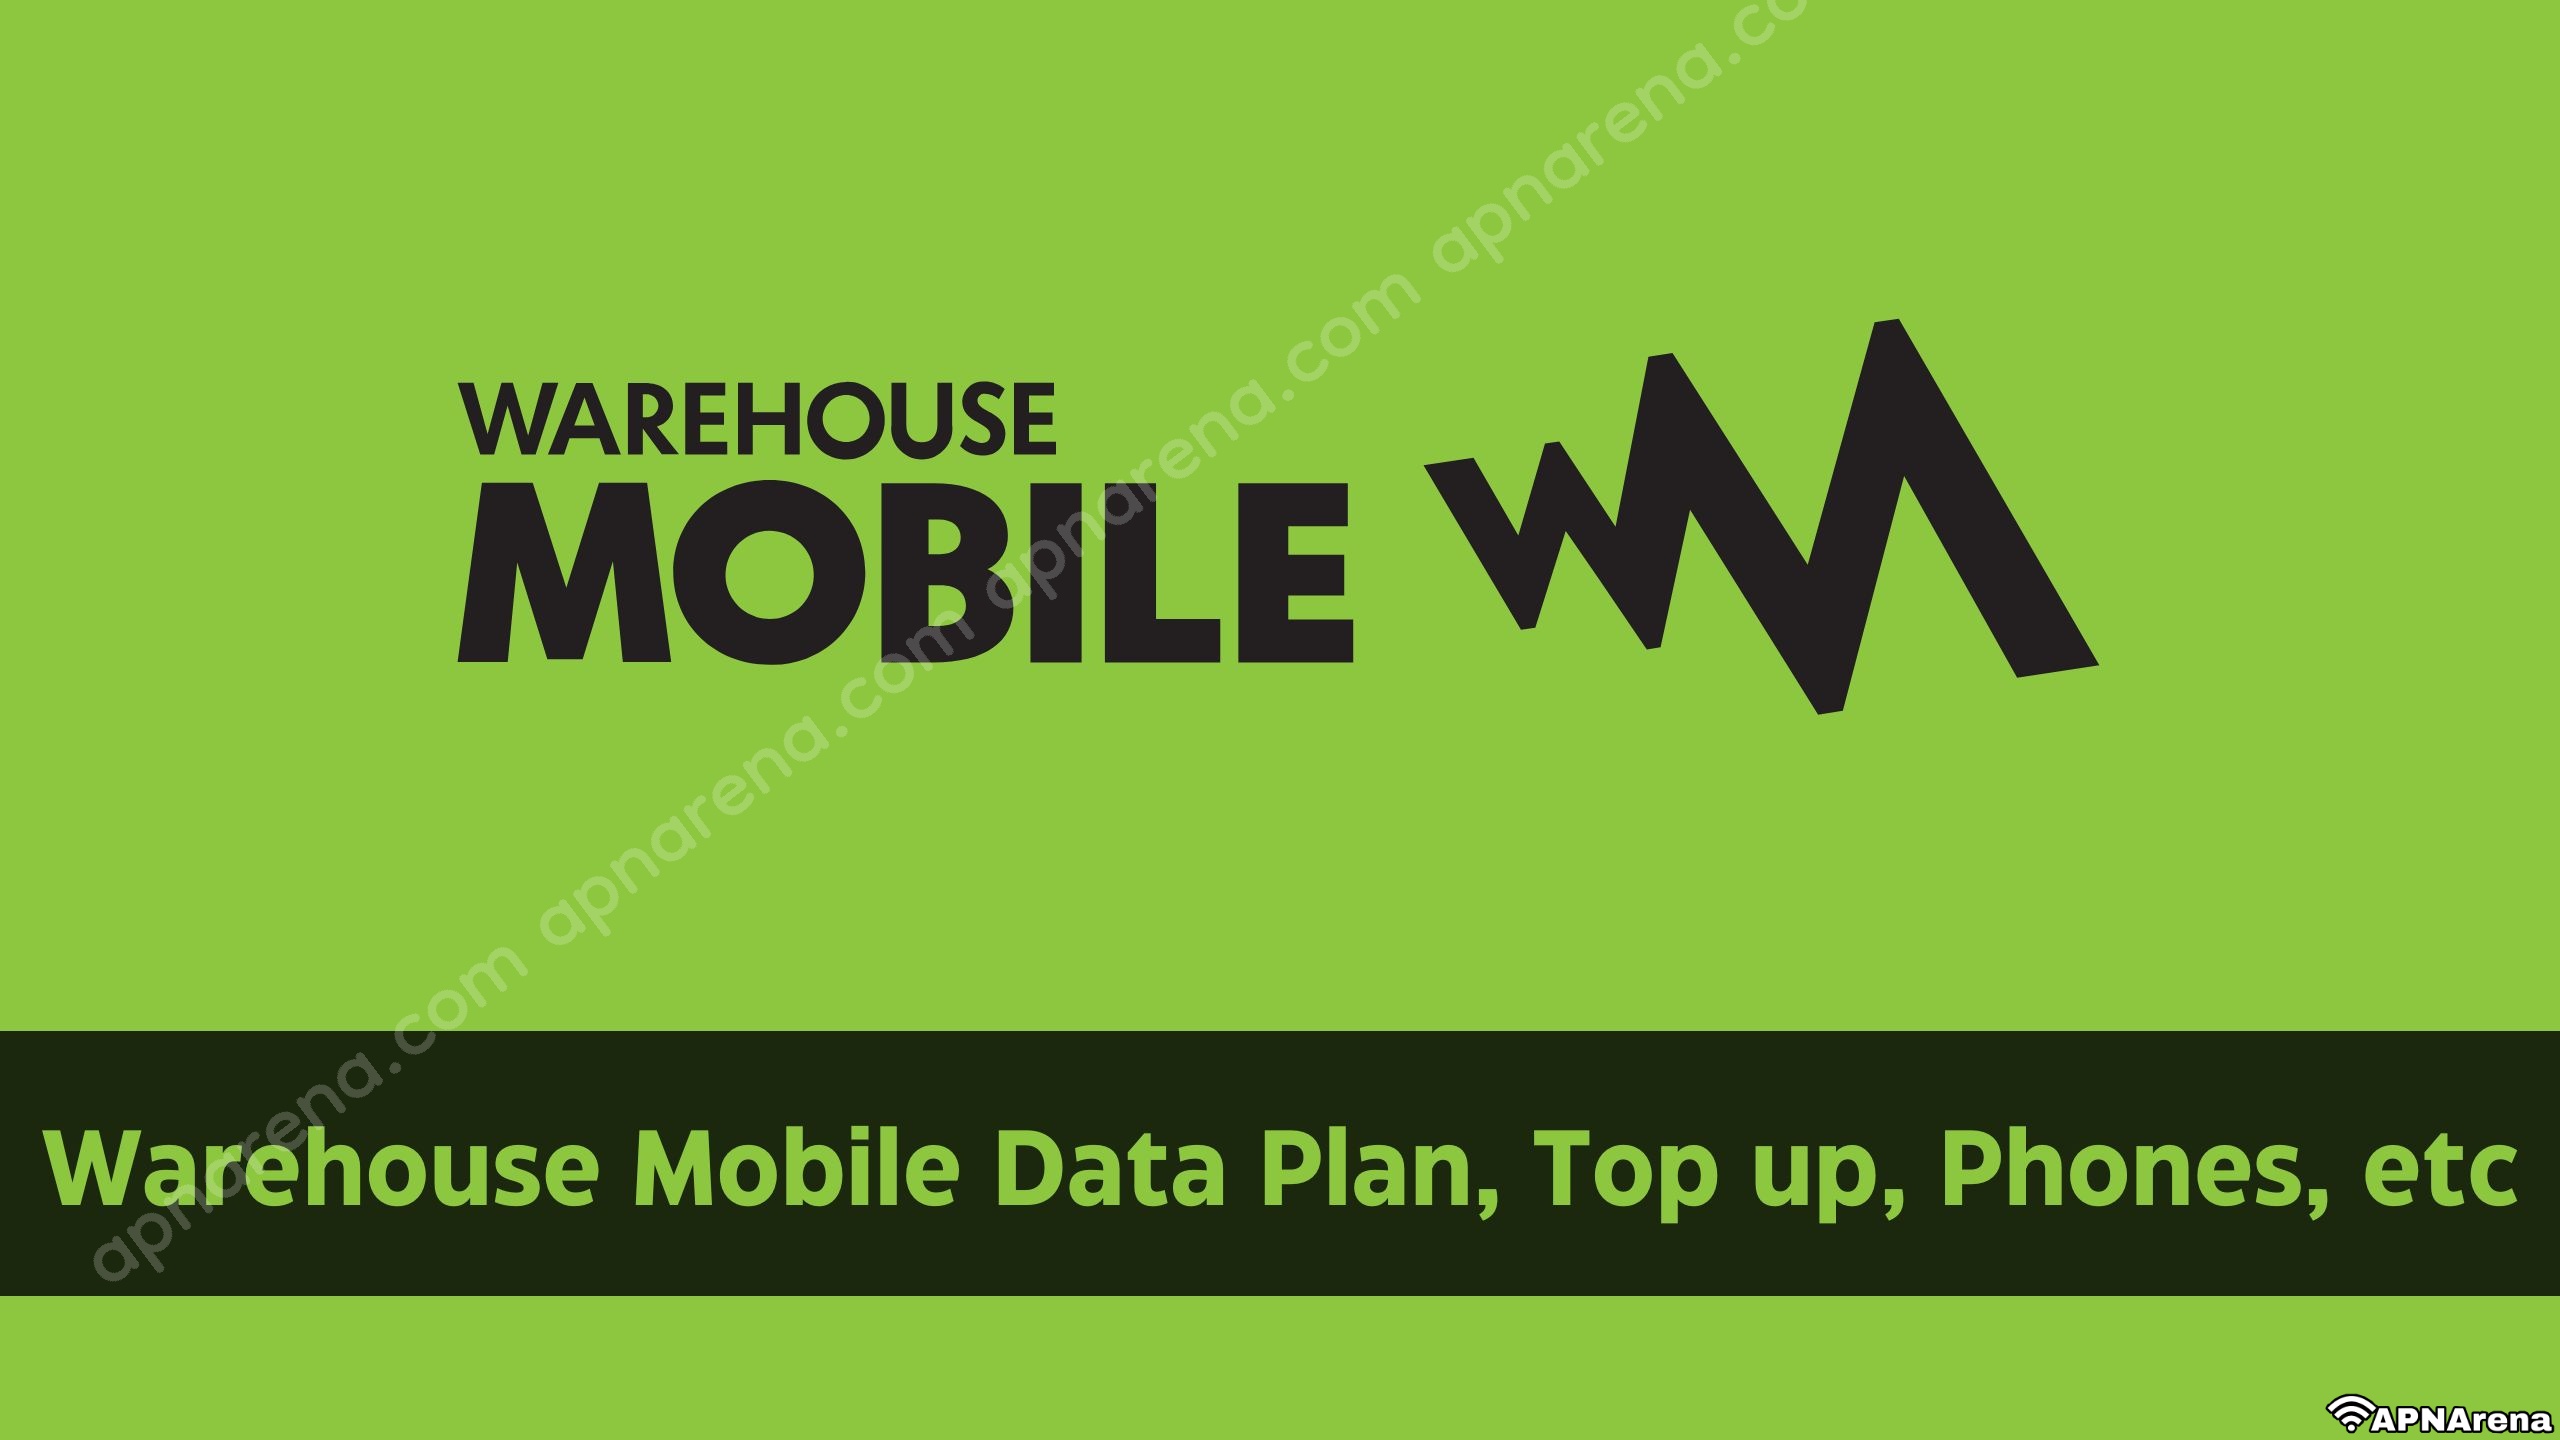 Warehouse Mobile NZ Prepaid Data Plan and Promos, Phone, Top up, SIM Cards and Internet Packs